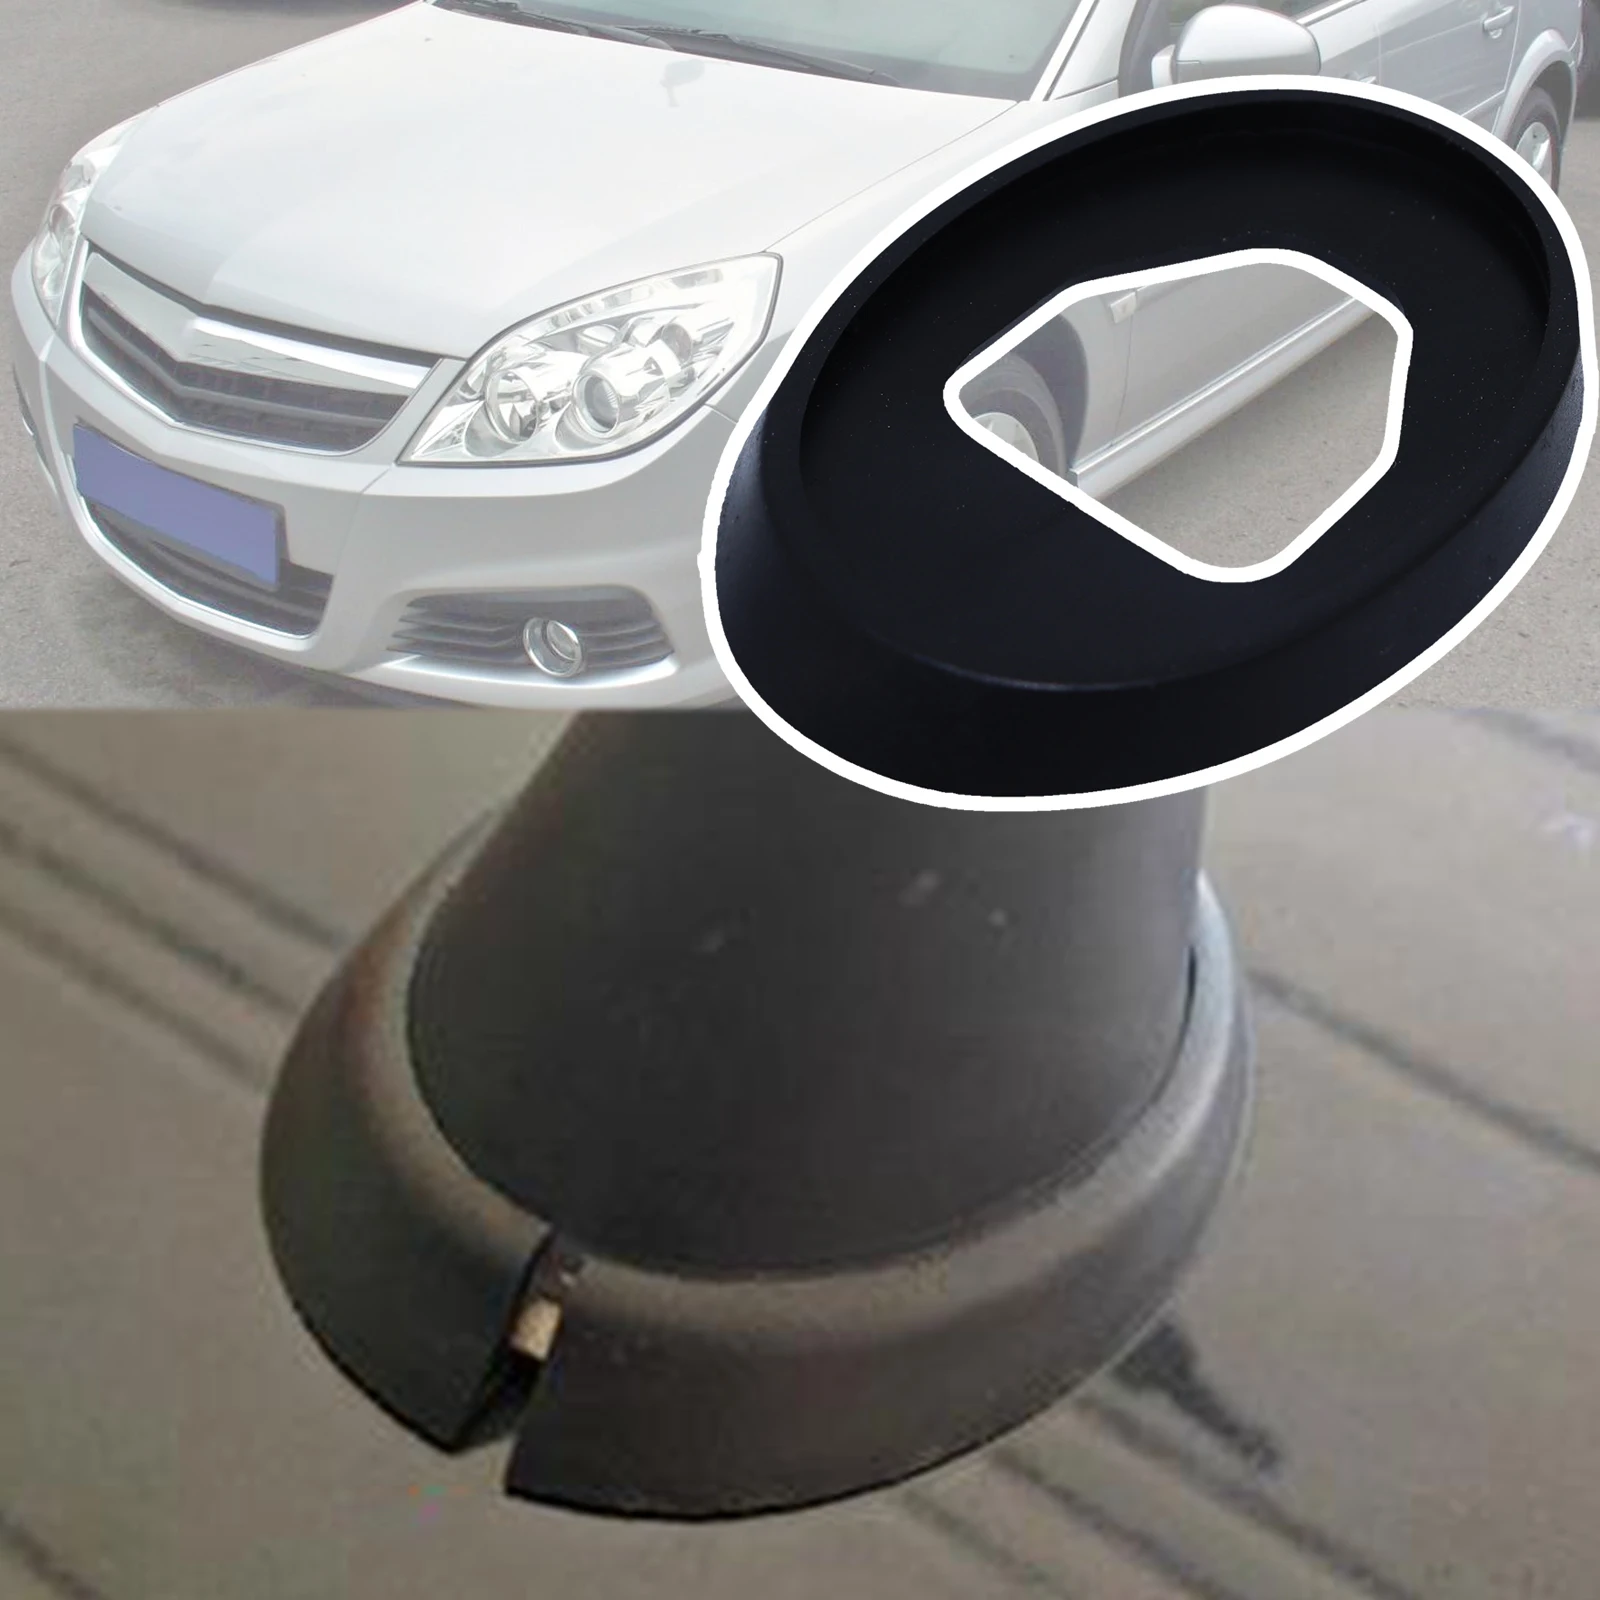 

Car Top Roof Mast Whip Aerial Antenna Rubber Base Gasket For Opel Vauxhall Signum Seal Pad Cover Replacement 2008 2007 2006 2005